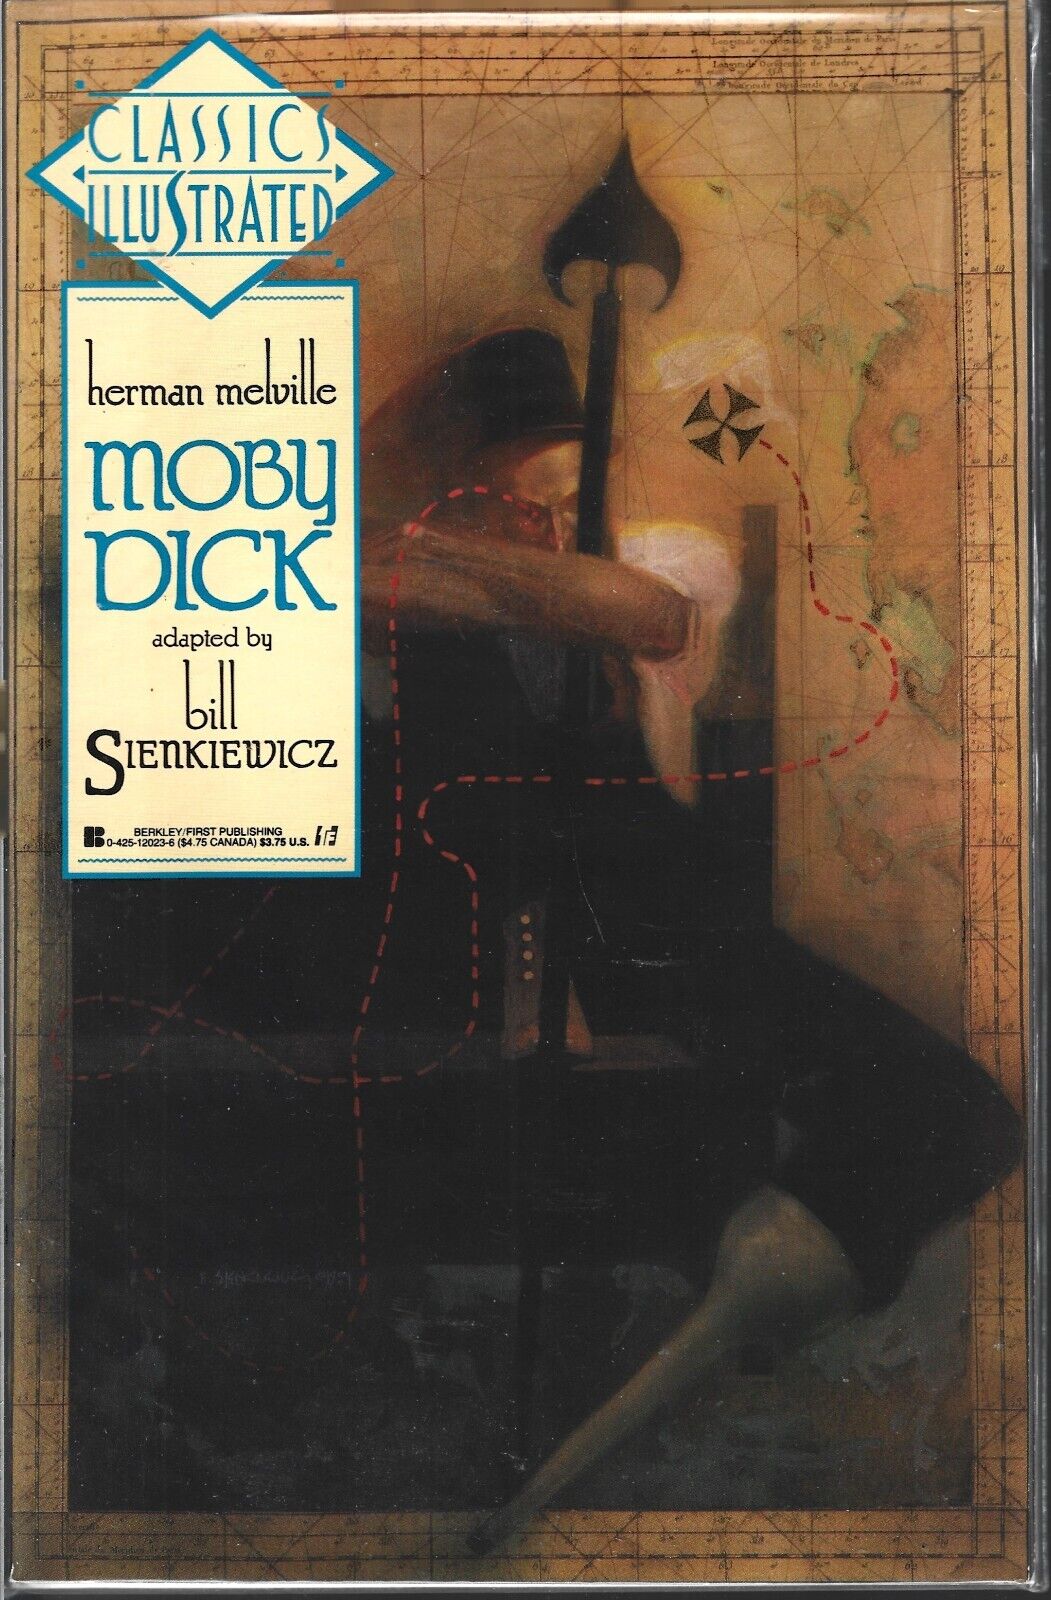 CLASSICS ILLUSTRATED HERMAN MELVILLE MOBY DICK (NM) ADAPTED BY BILL SIENKIEWICZ